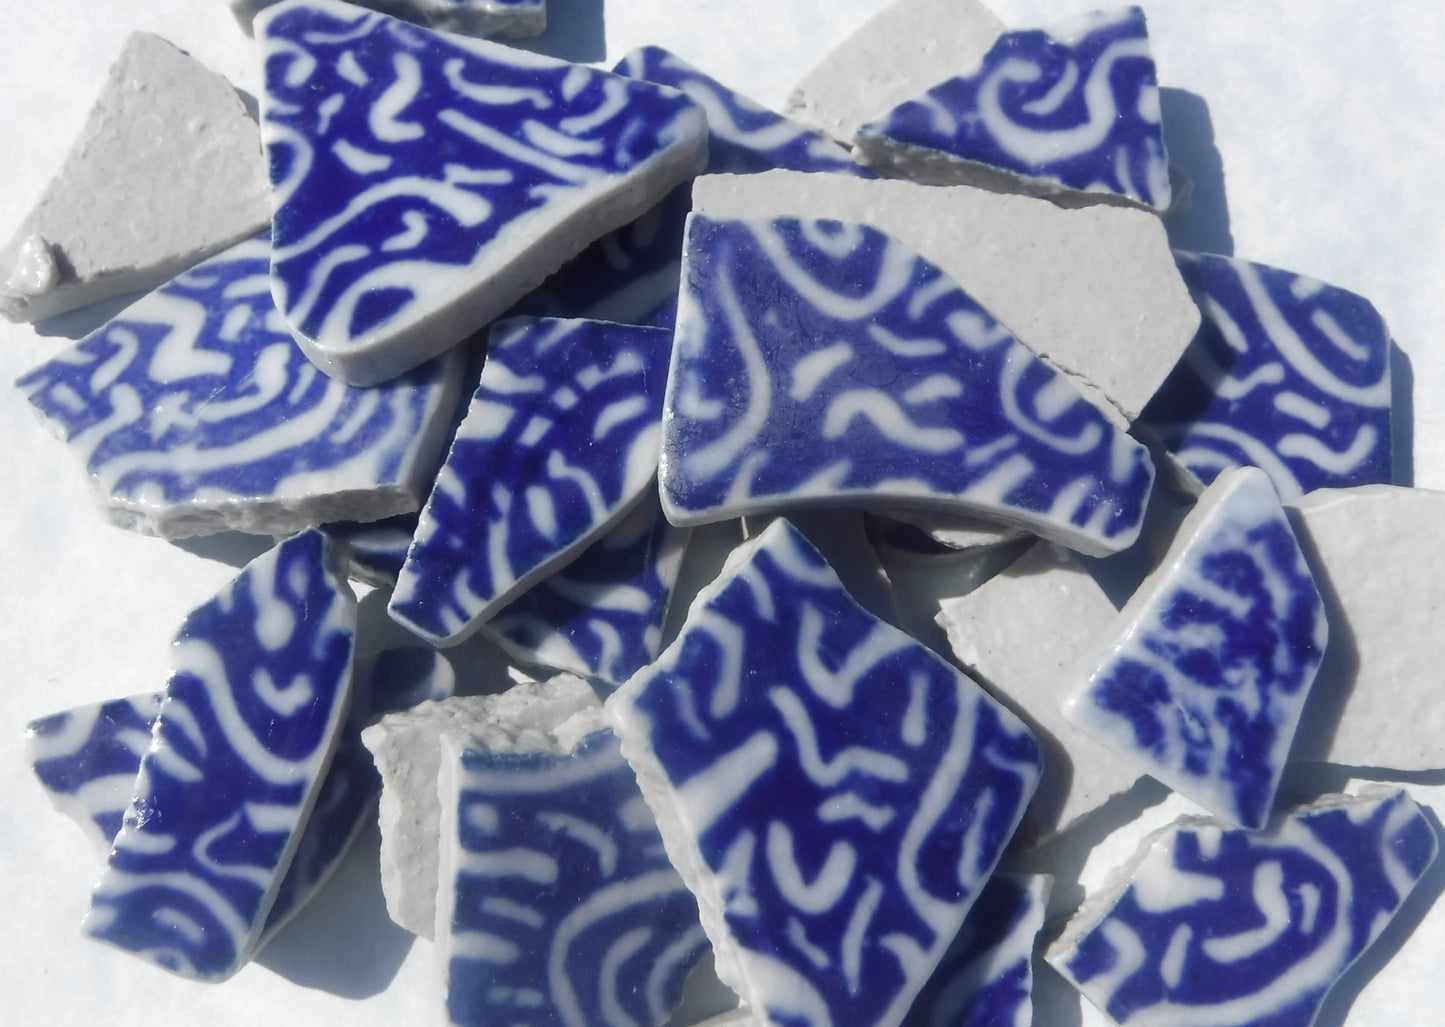 White Squiggles on Deep Blue Chunky Porcelain Mosaic Tiles - Half Pound